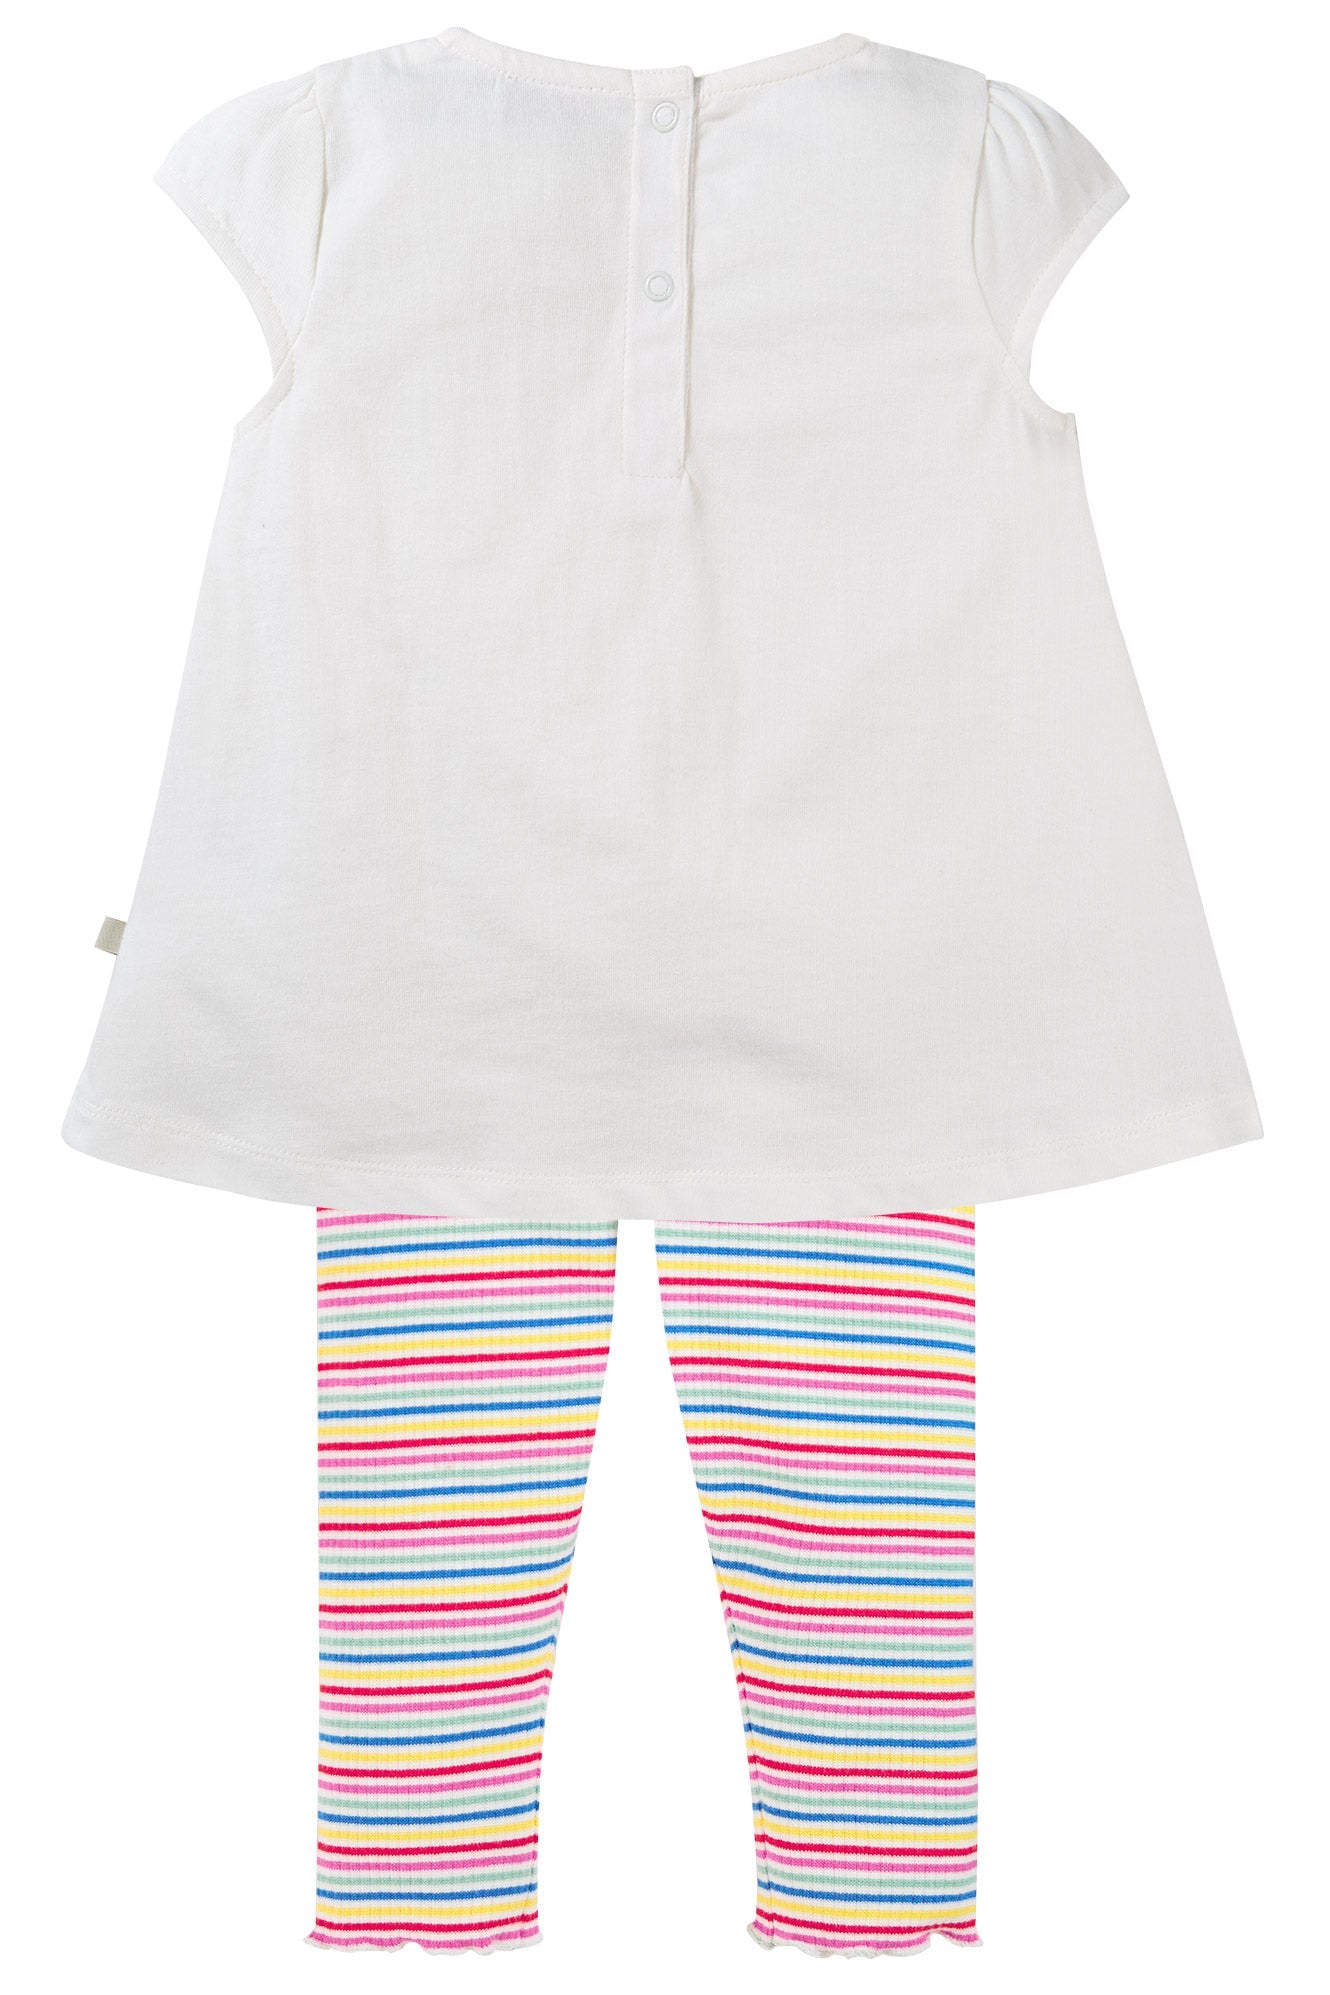 Frugi Jade Outfit - Soft White/Rainbow Rib-Kids-Ohh! By Gum - Shop Sustainable